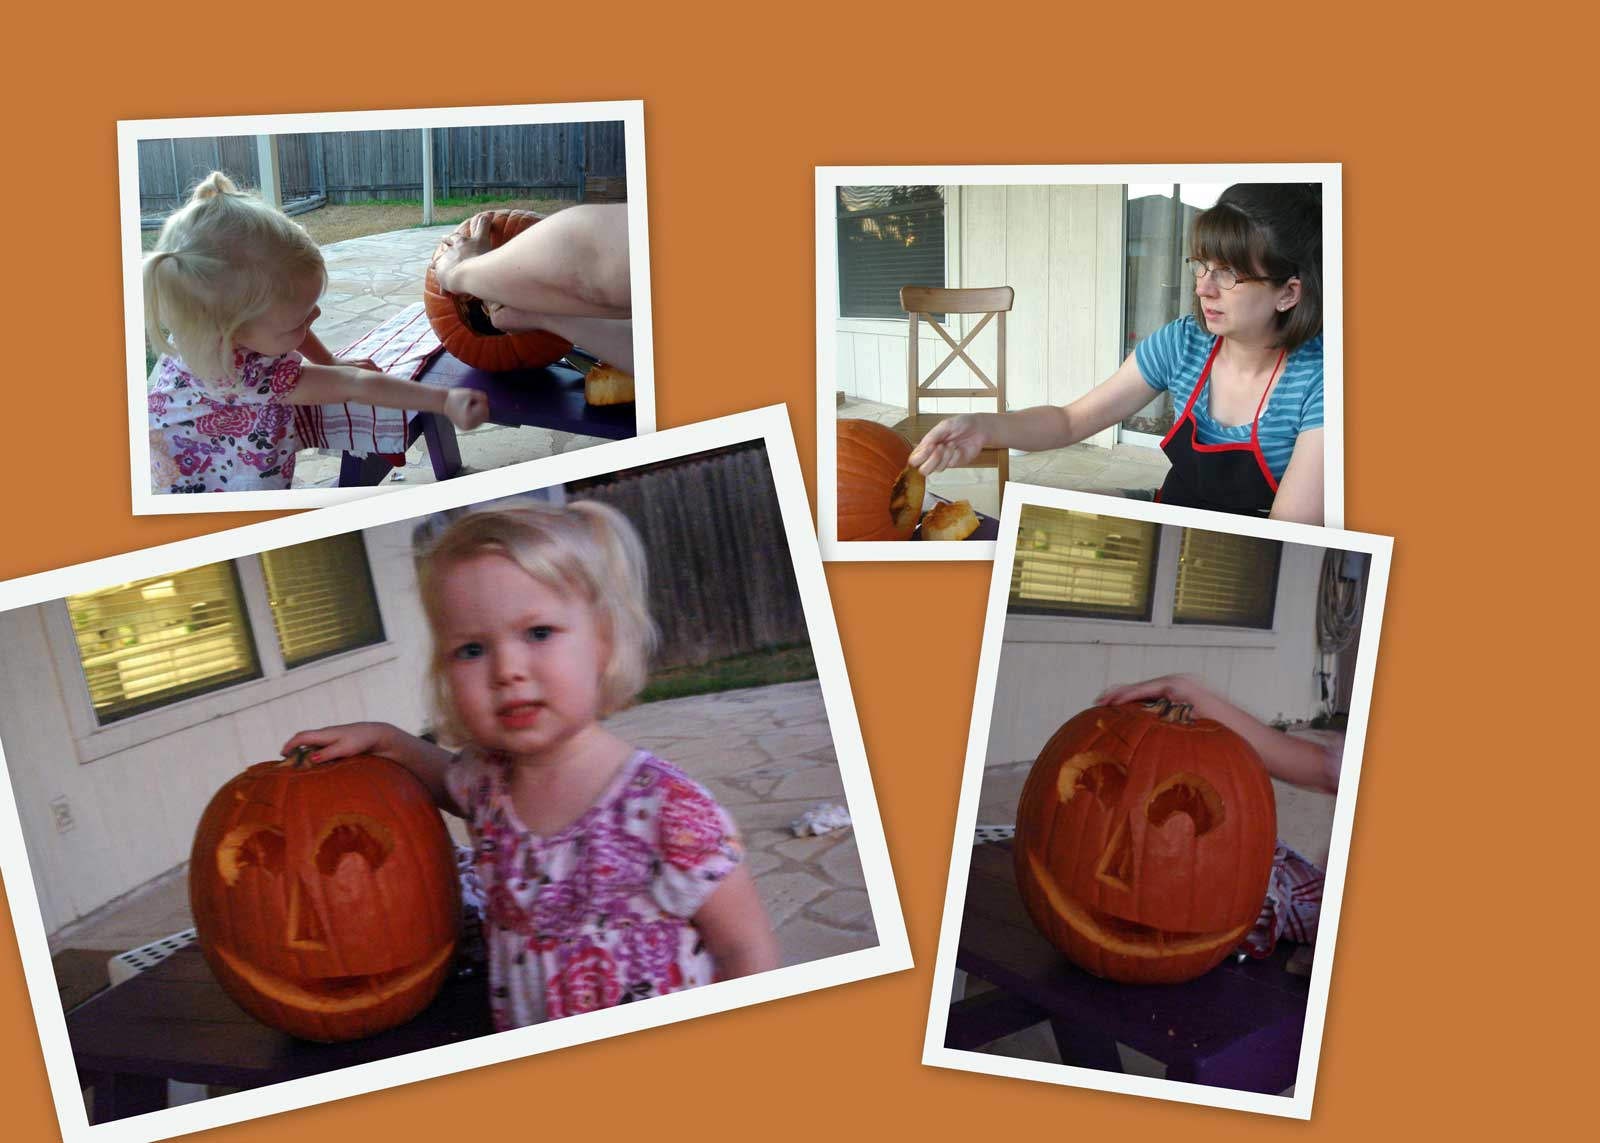 Queen Emily and pumpkin carving